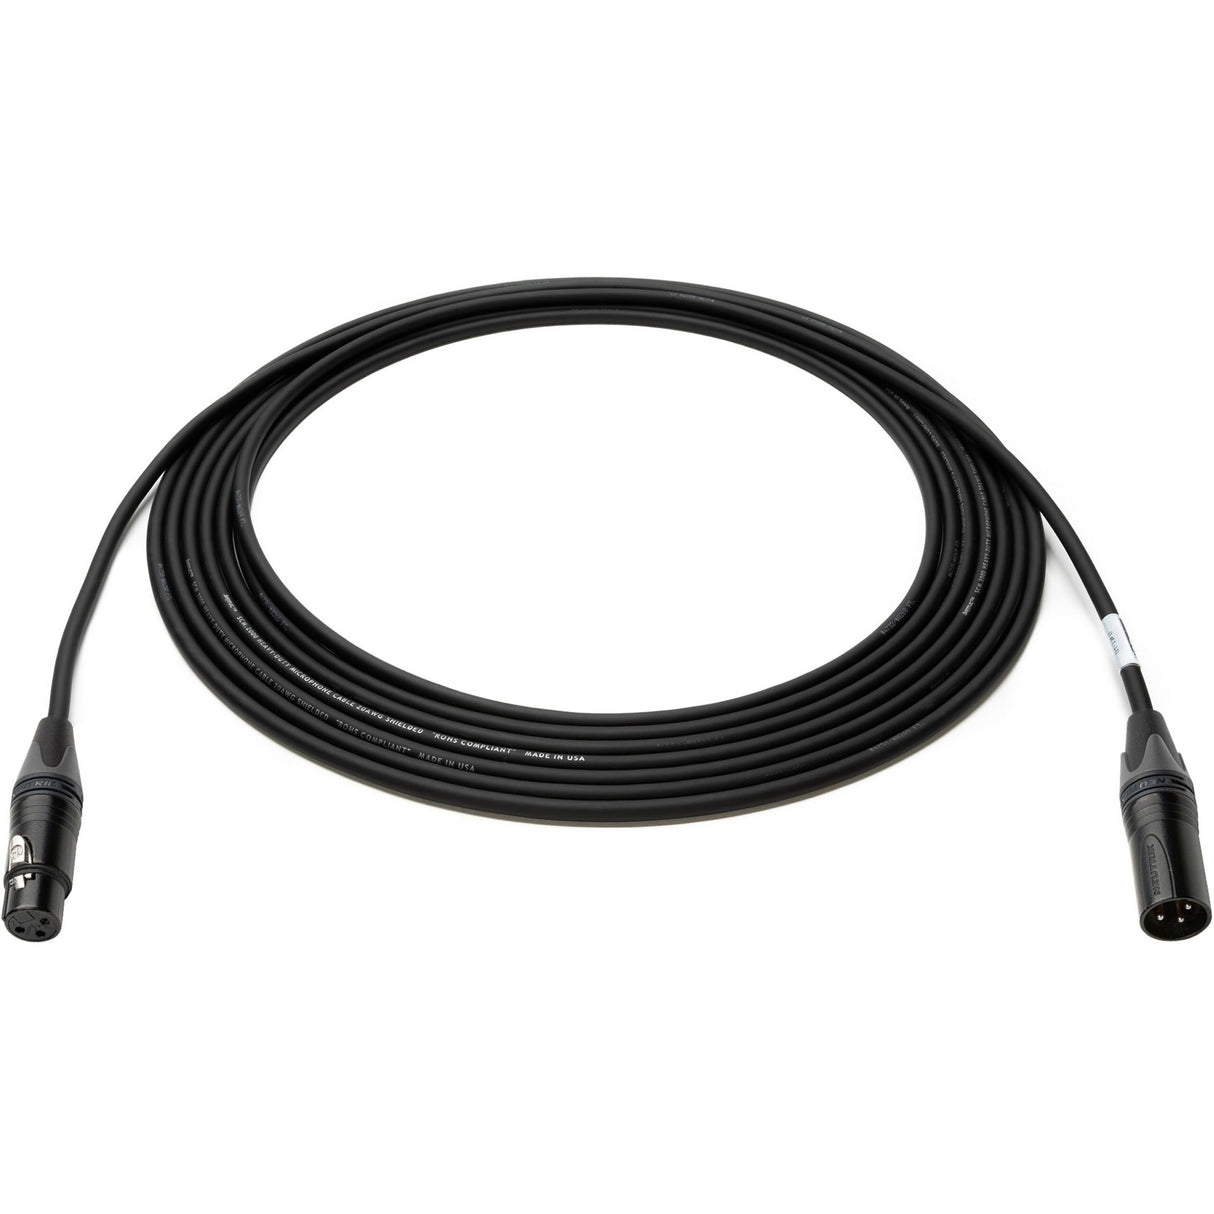 Sescom SCTX-XXJ-075 Touring Grade Microphone Cable with Neutrik Black and Silver 3-Pin XLR Connectors, 75-Foot